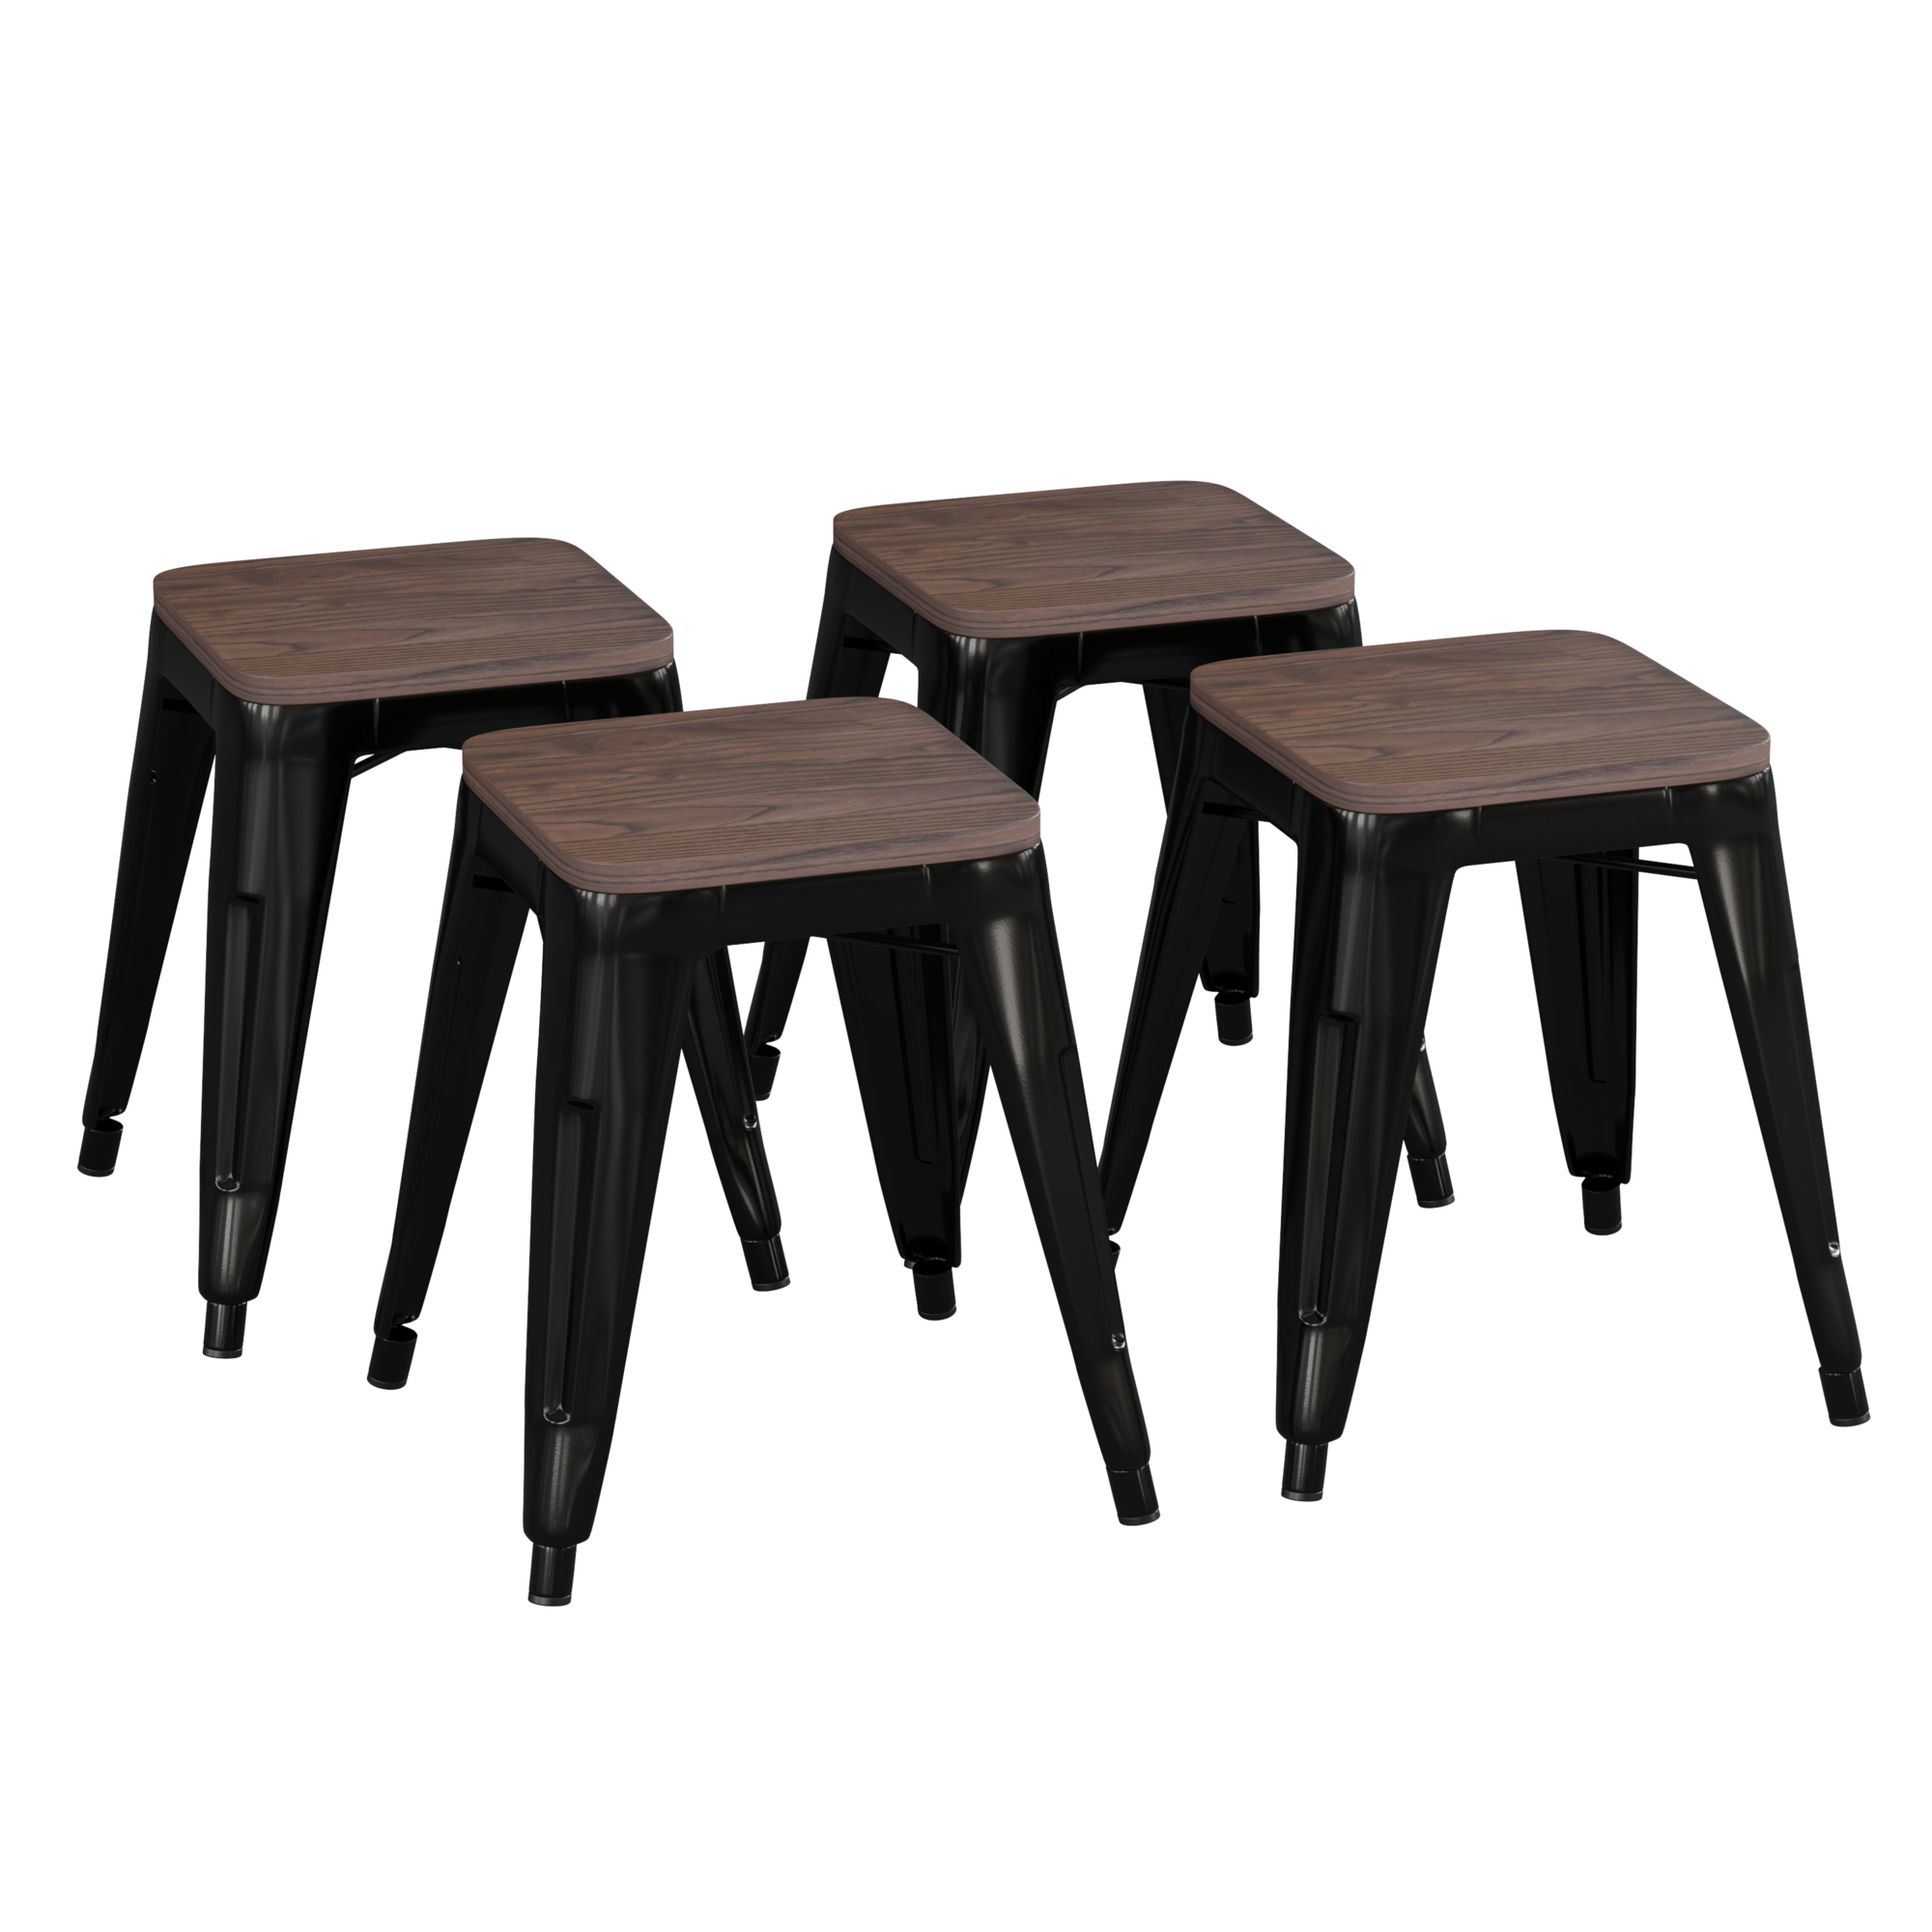 Flash Furniture, 4 Pack 18Inch Black Metal Stool with Wood Seat, Primary Color Black, Included (qty.) 4, Model ETBT350318BLKWD